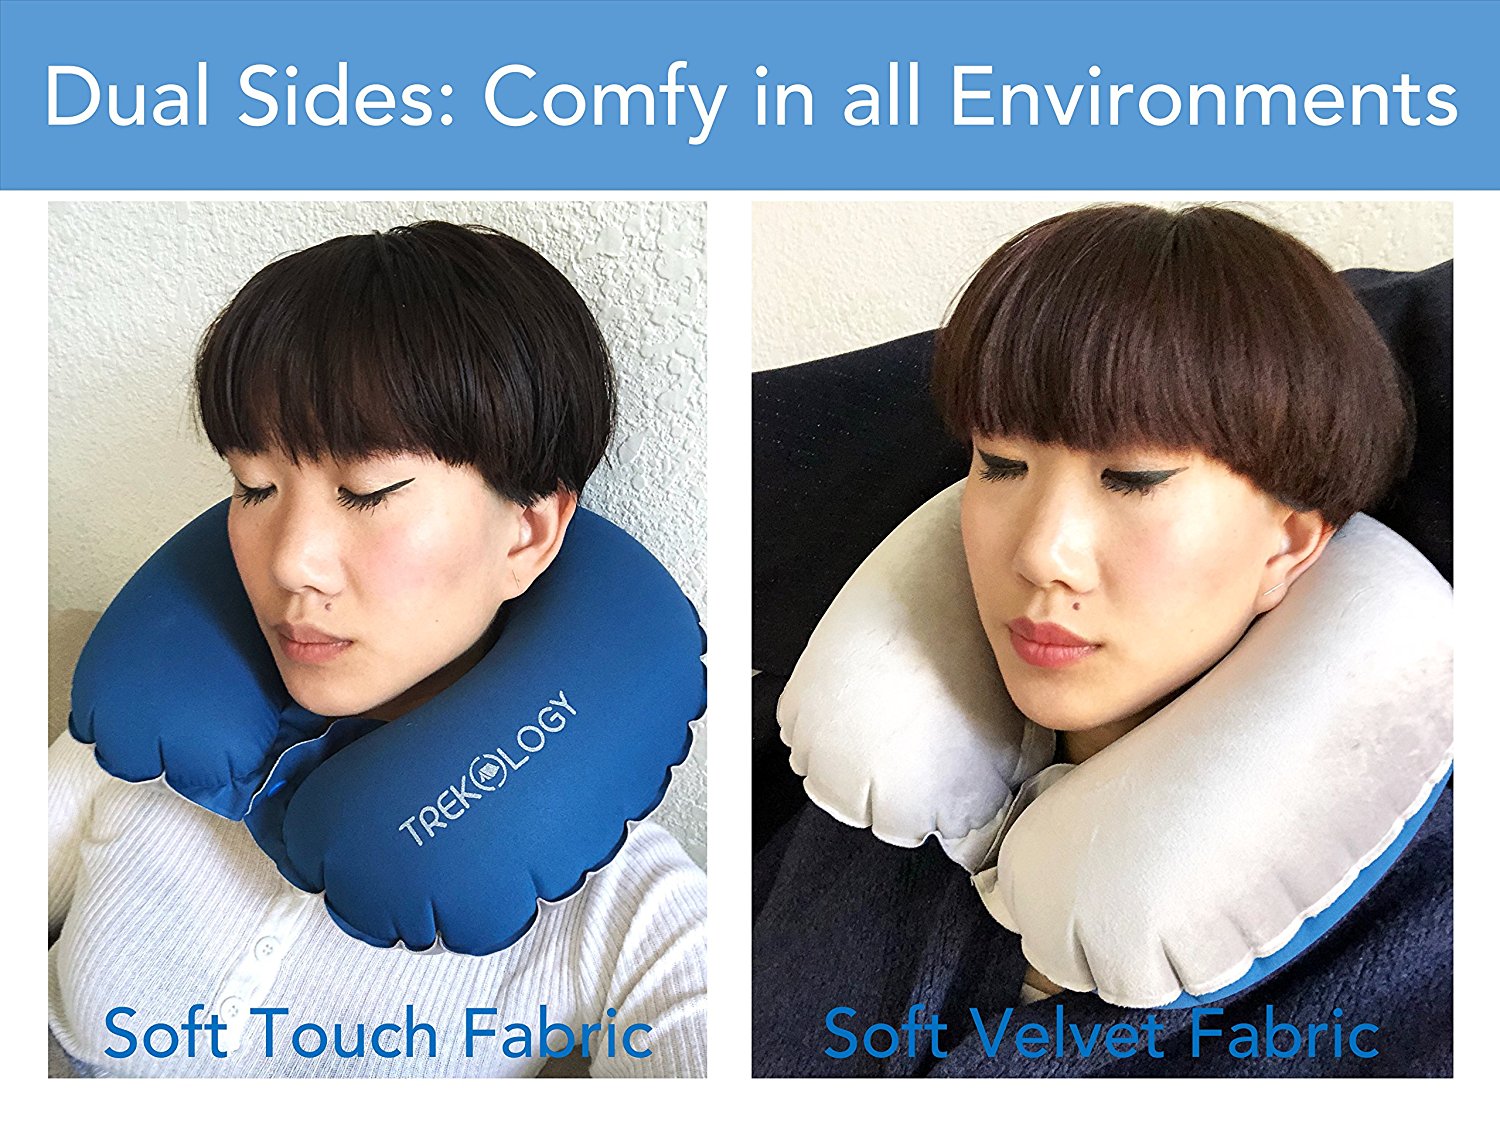 Buy World's Best Memory Foam Travel Pillow Online At Lowest Prices